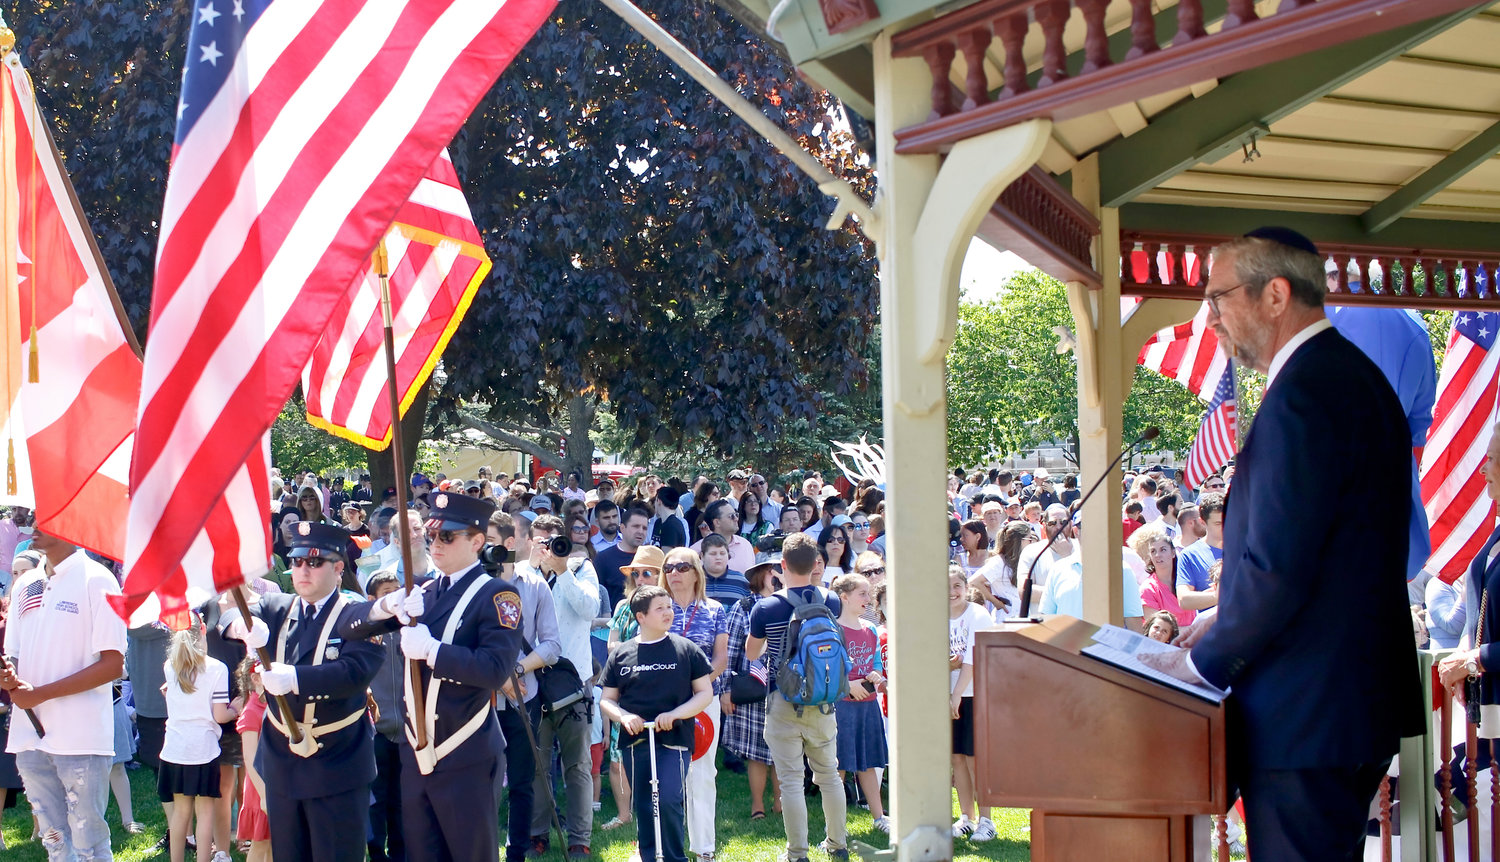 Rabbi Kenneth Hain of Congregation Beth Sholom in Lawrence said a prayer at the gathering in Cedarhurst’s Andrew J. Parise Park.